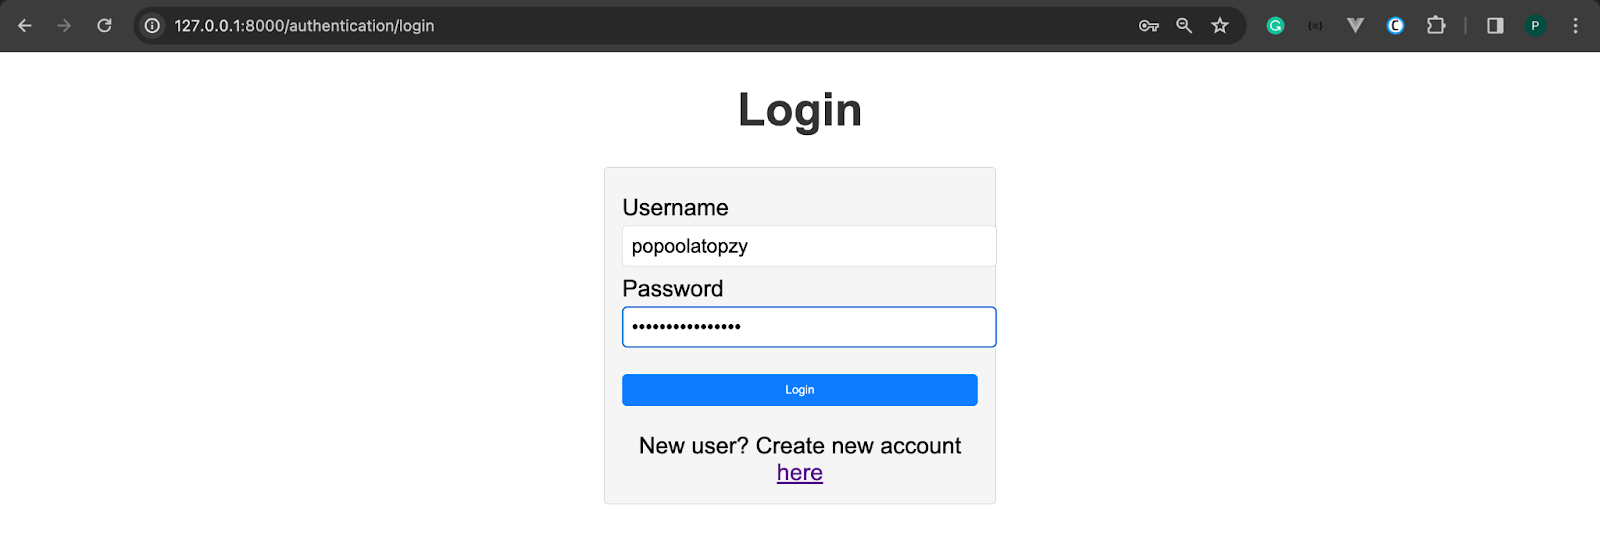 The login form of the application with the user"s username and password already filled in.